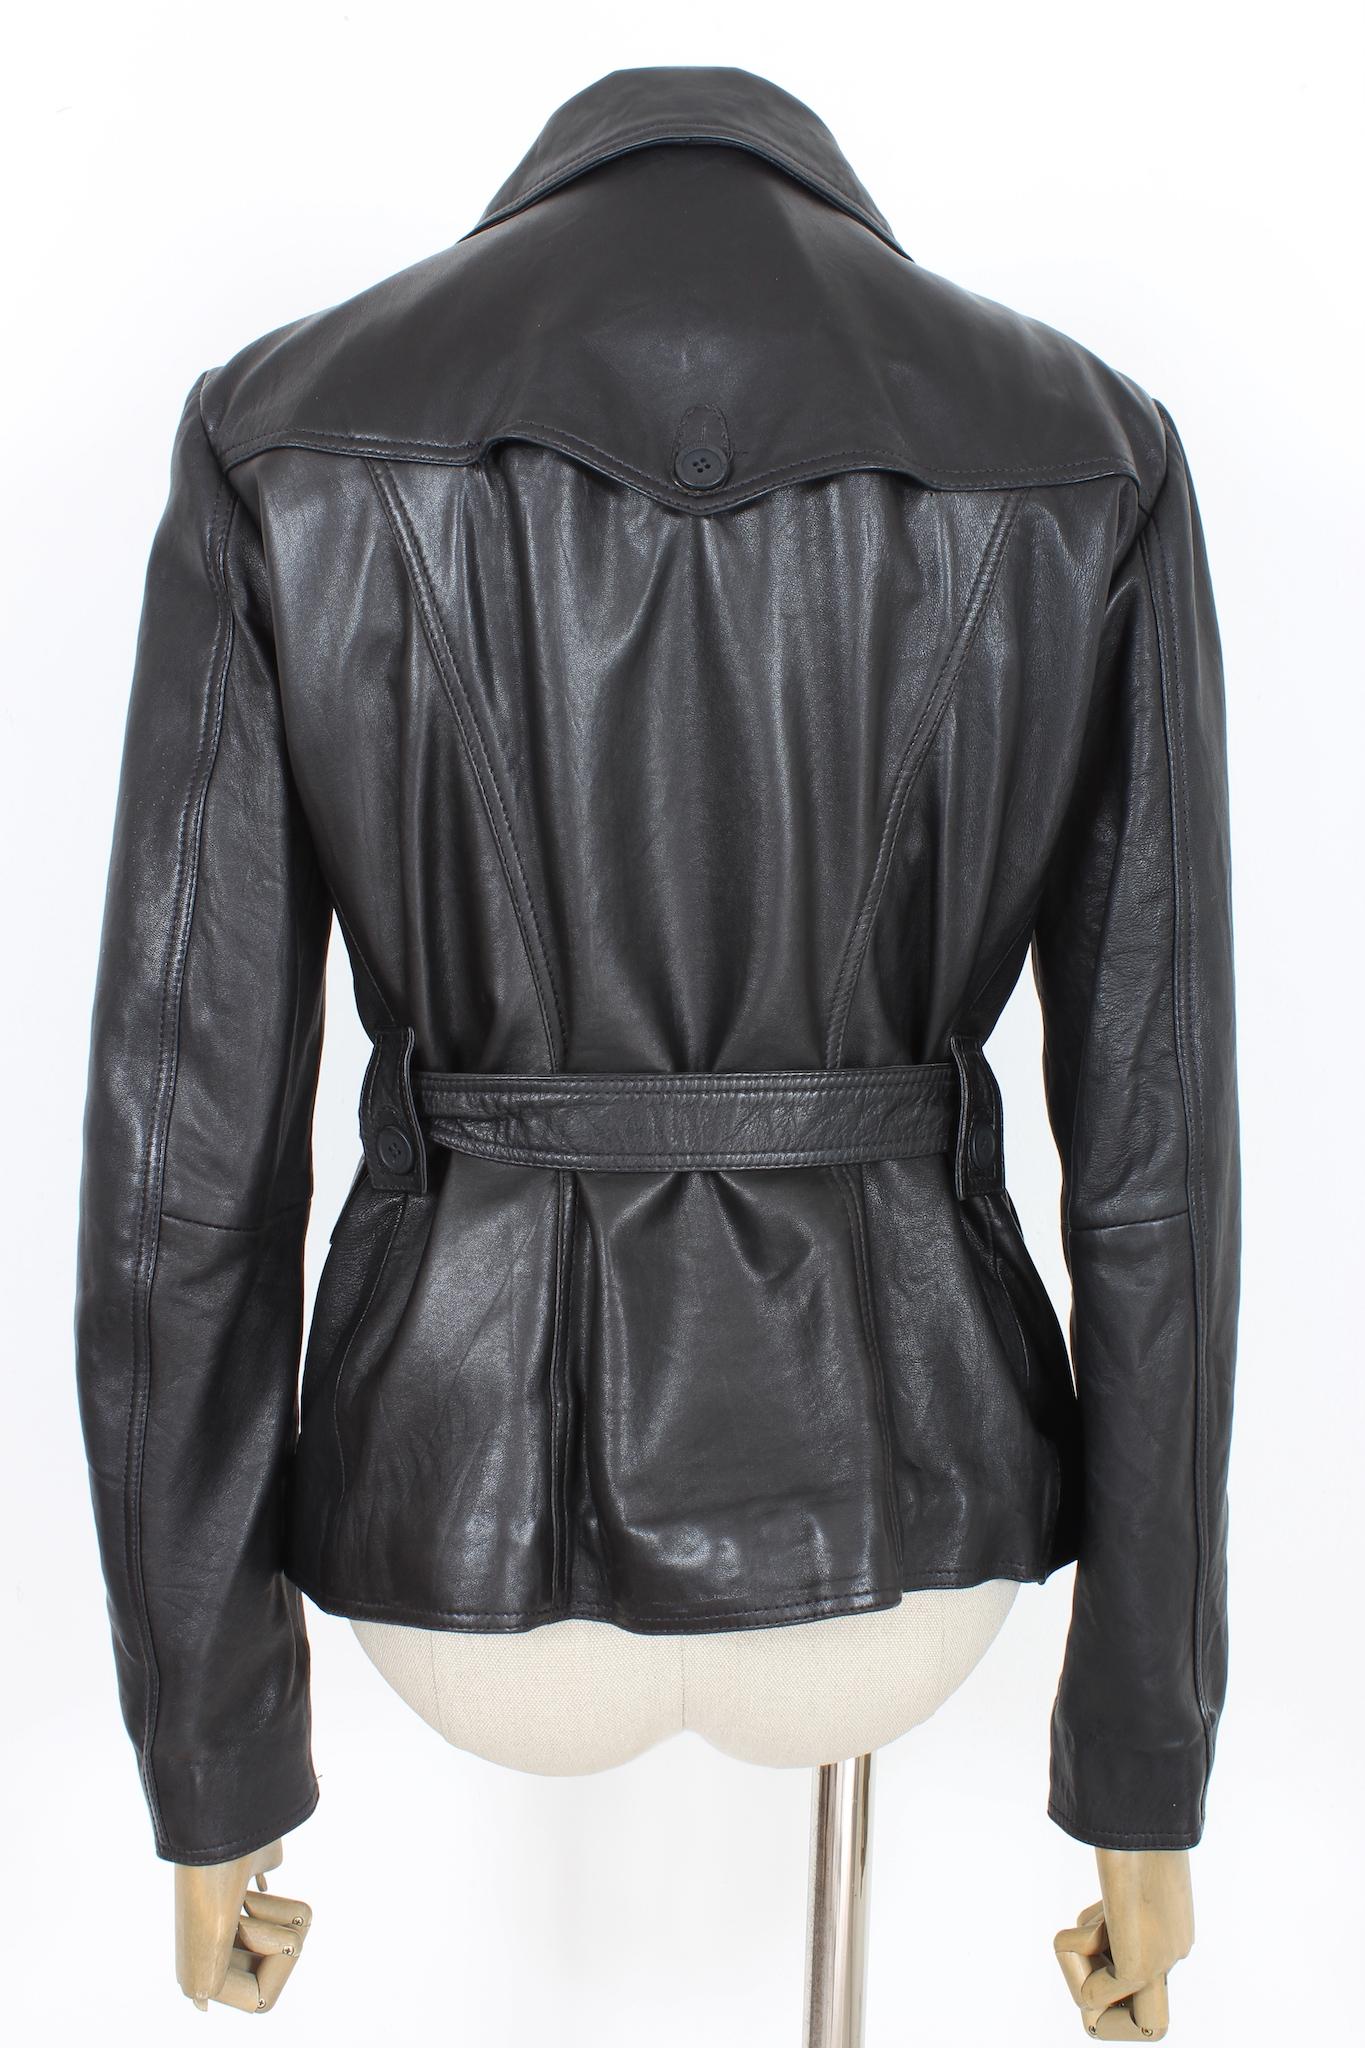 Beautiful vintage 90s leather chiodo jacket by the designer Alberta Ferretti. Black colour, two-way zip closure, side and chest pockets, adjustable waist belt. 100% sheepskin fabric, internally lined in cotton. Made in Italy.

Size: 44 It 10 Us 12